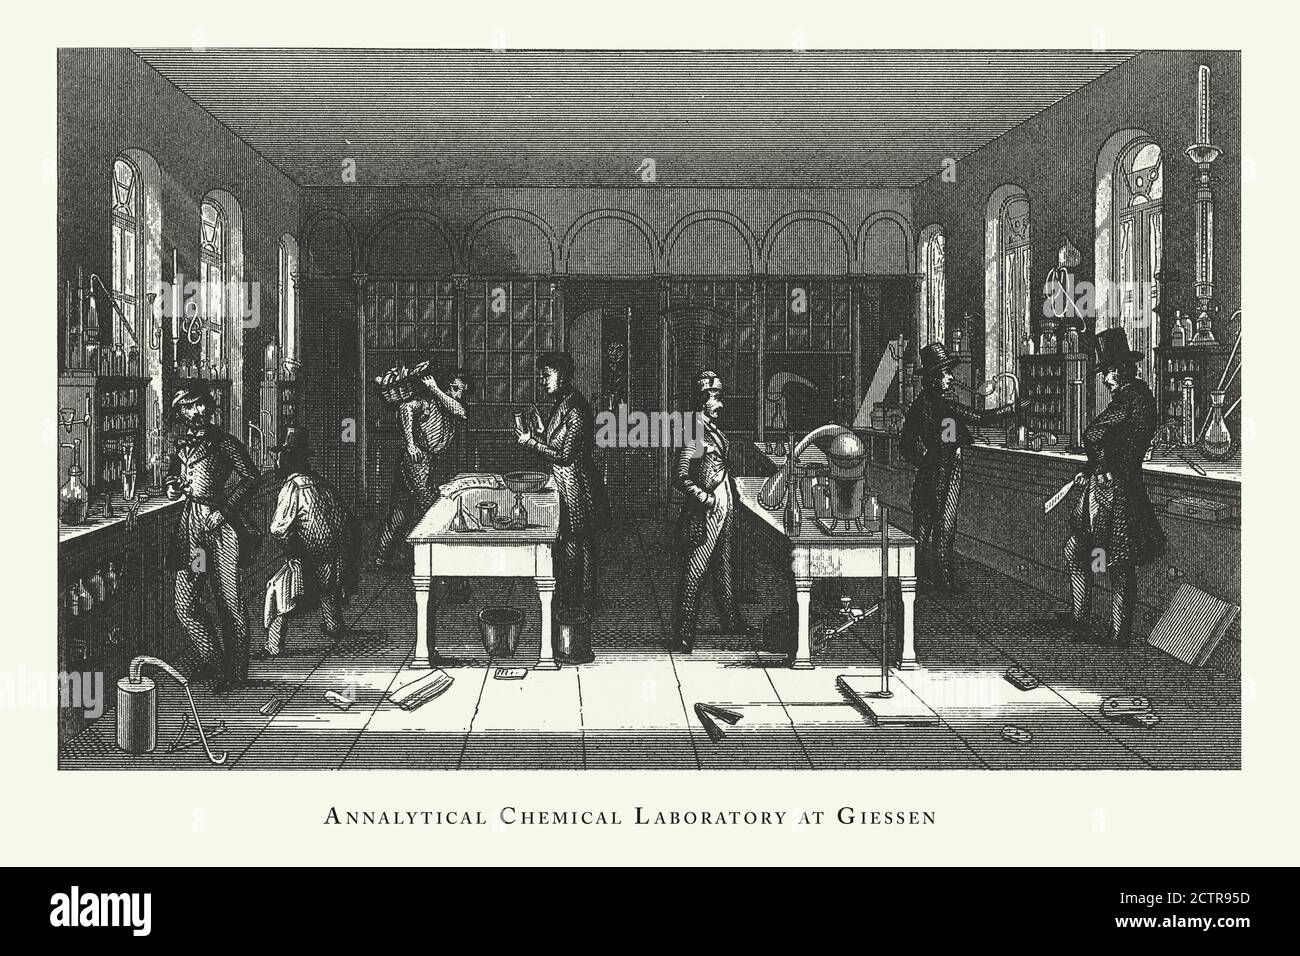 Analytical Chemical Laboratory at Giessen, Chemical Laboratory, Apparatus, and Equipment Engraving Antique Illustration, Published 1851 Stock Photo